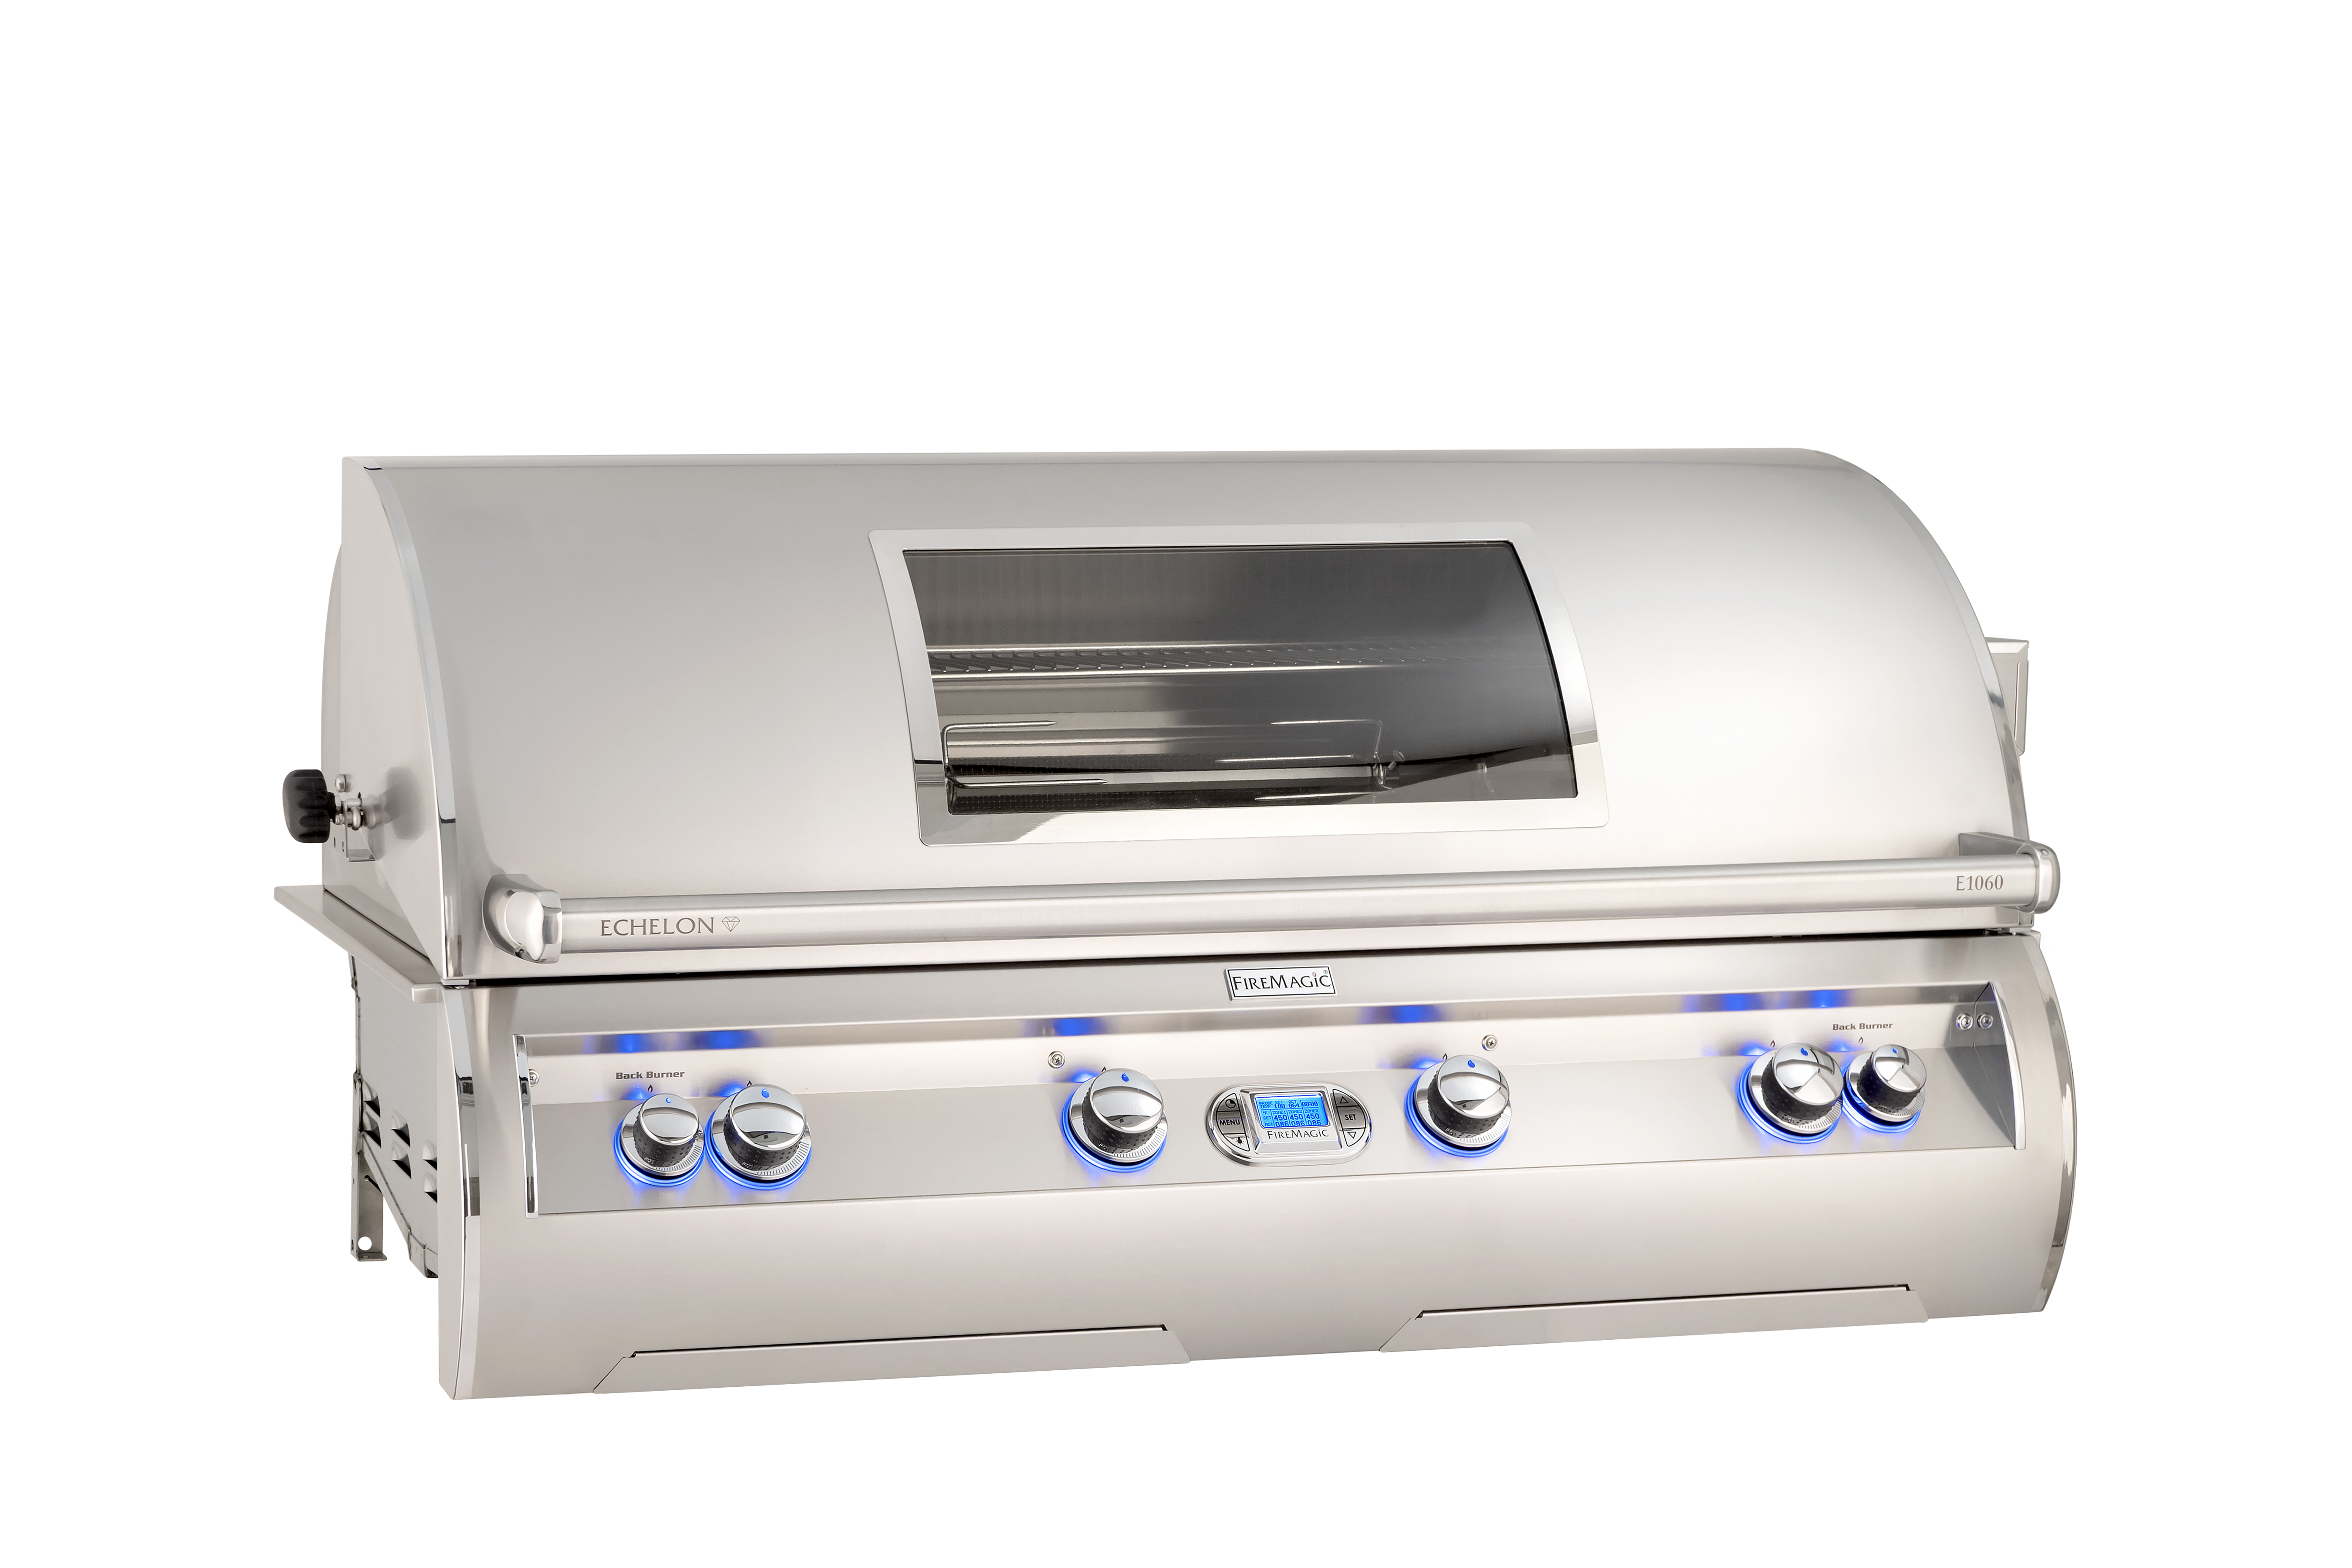 Fire Magic - Echelon - E1060 built-in grill with S